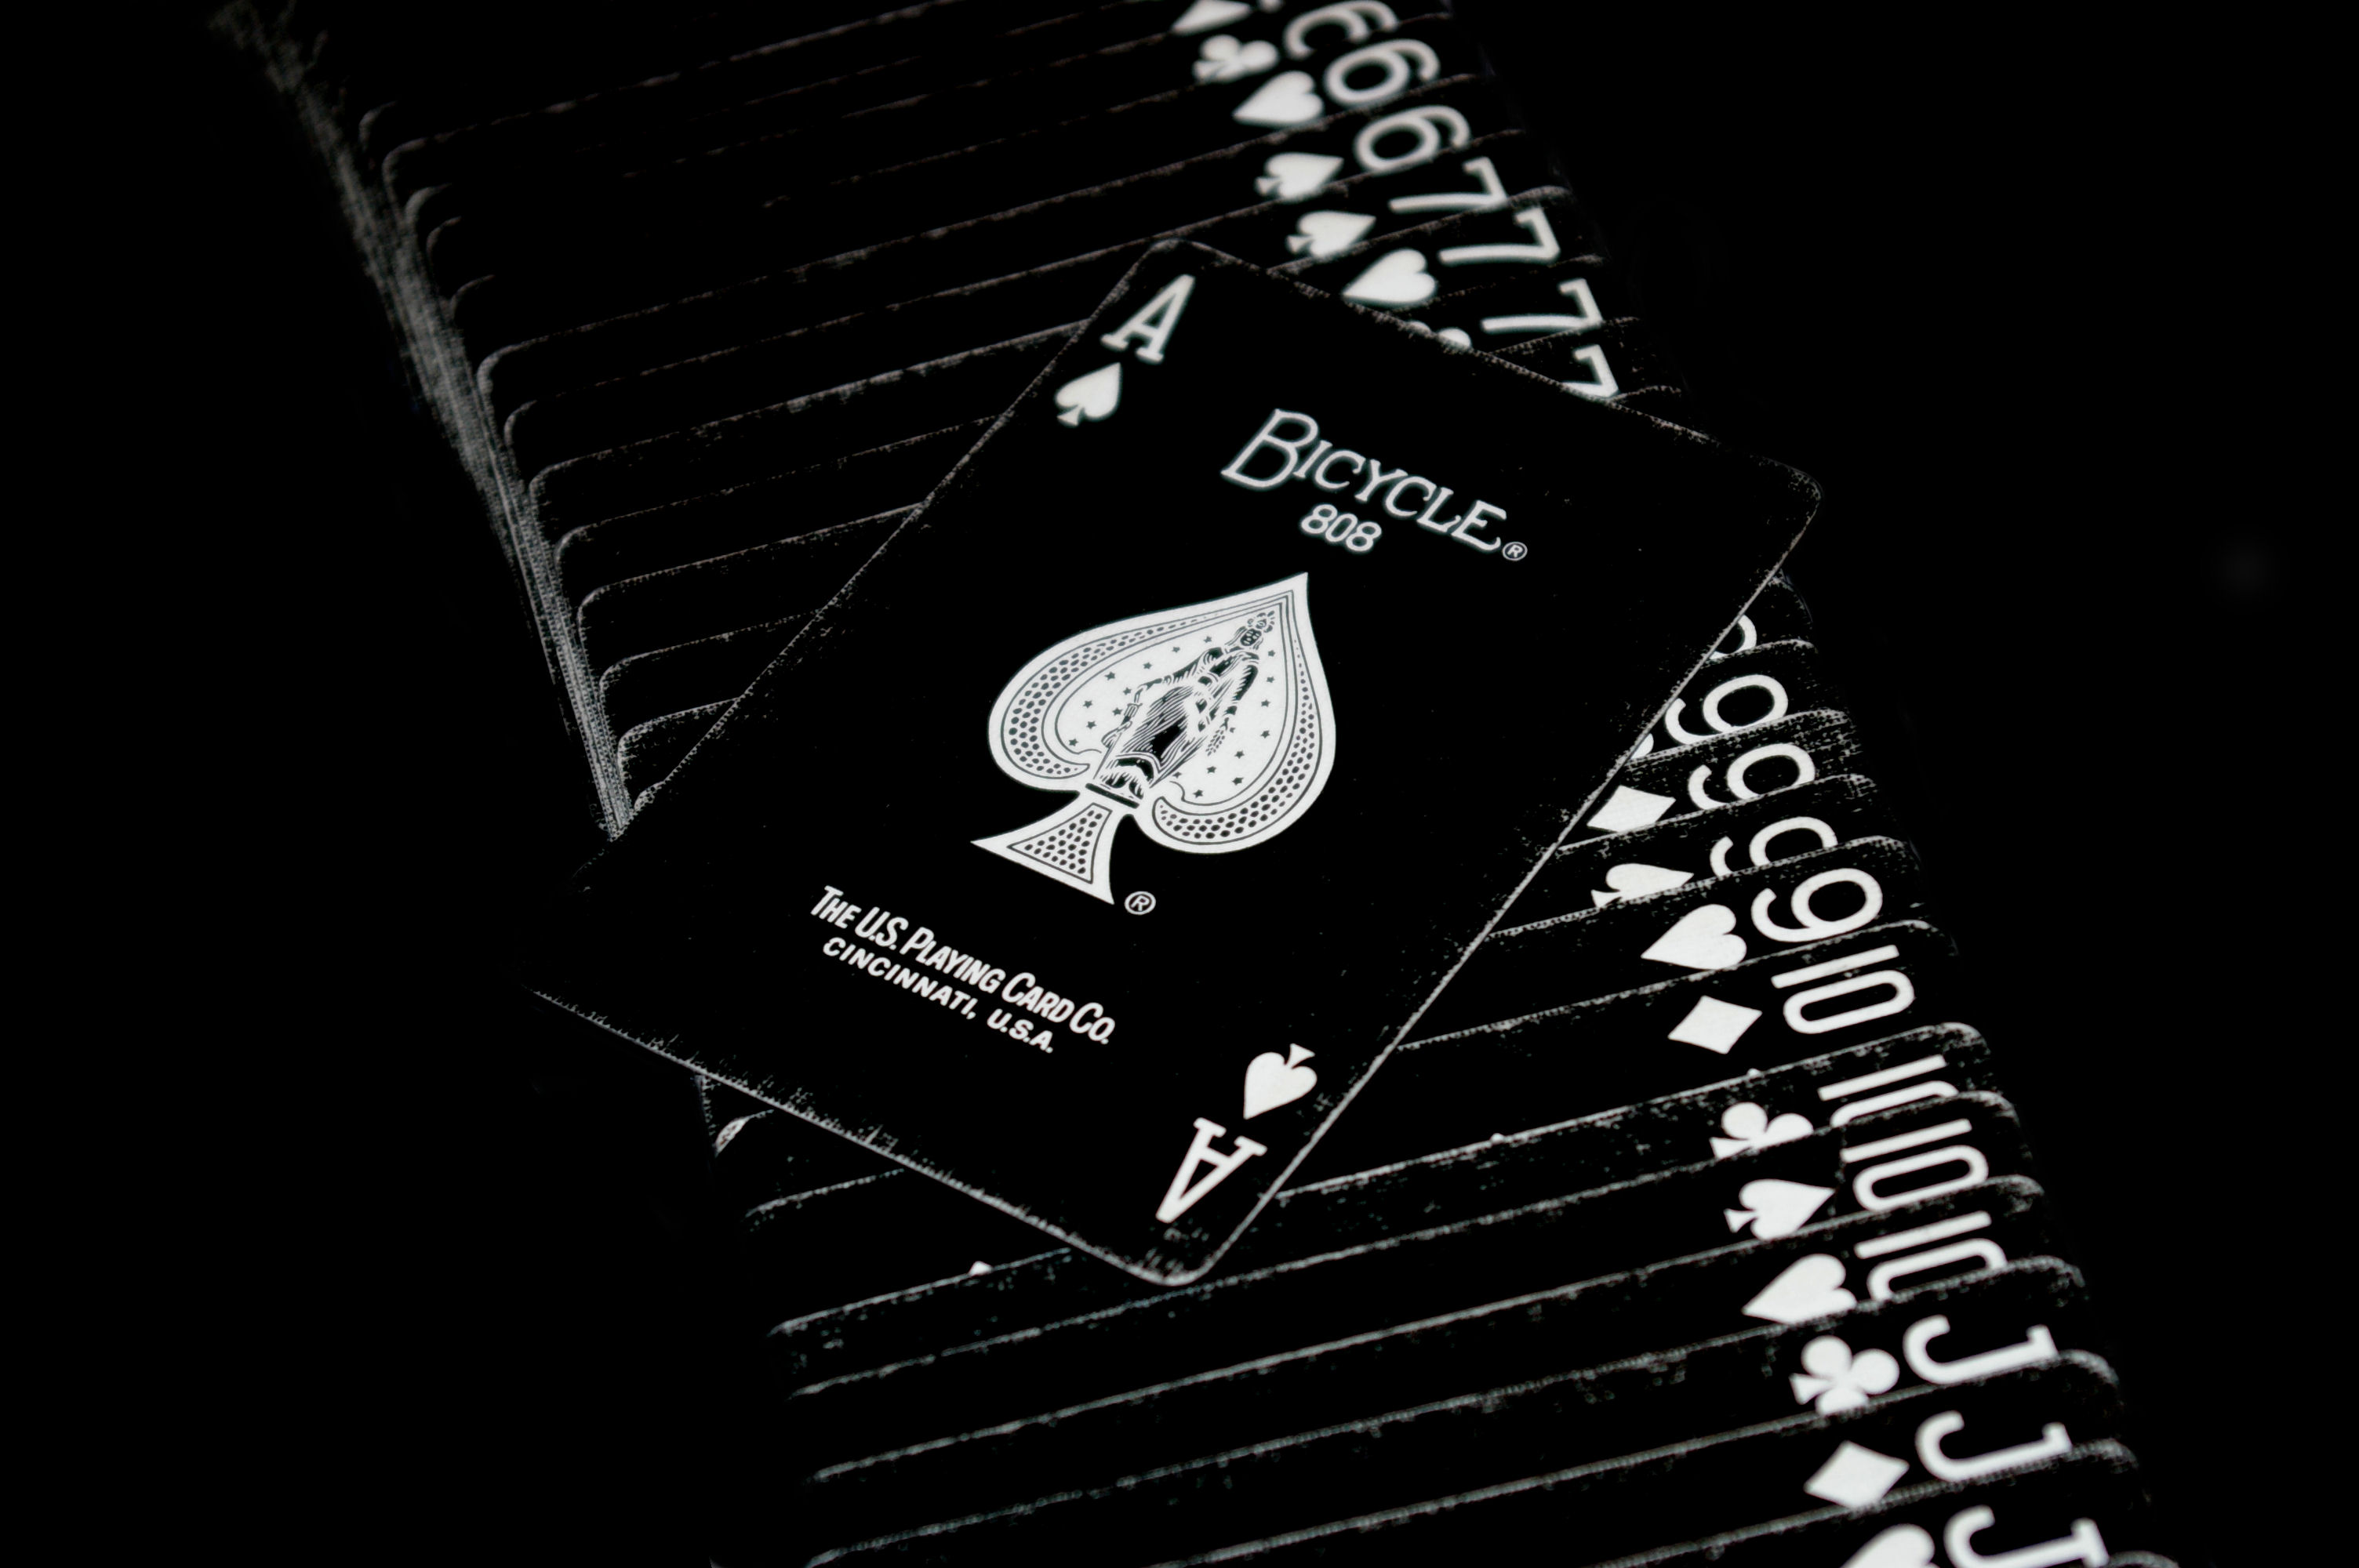 IMAGE aces playing cards wallpaper